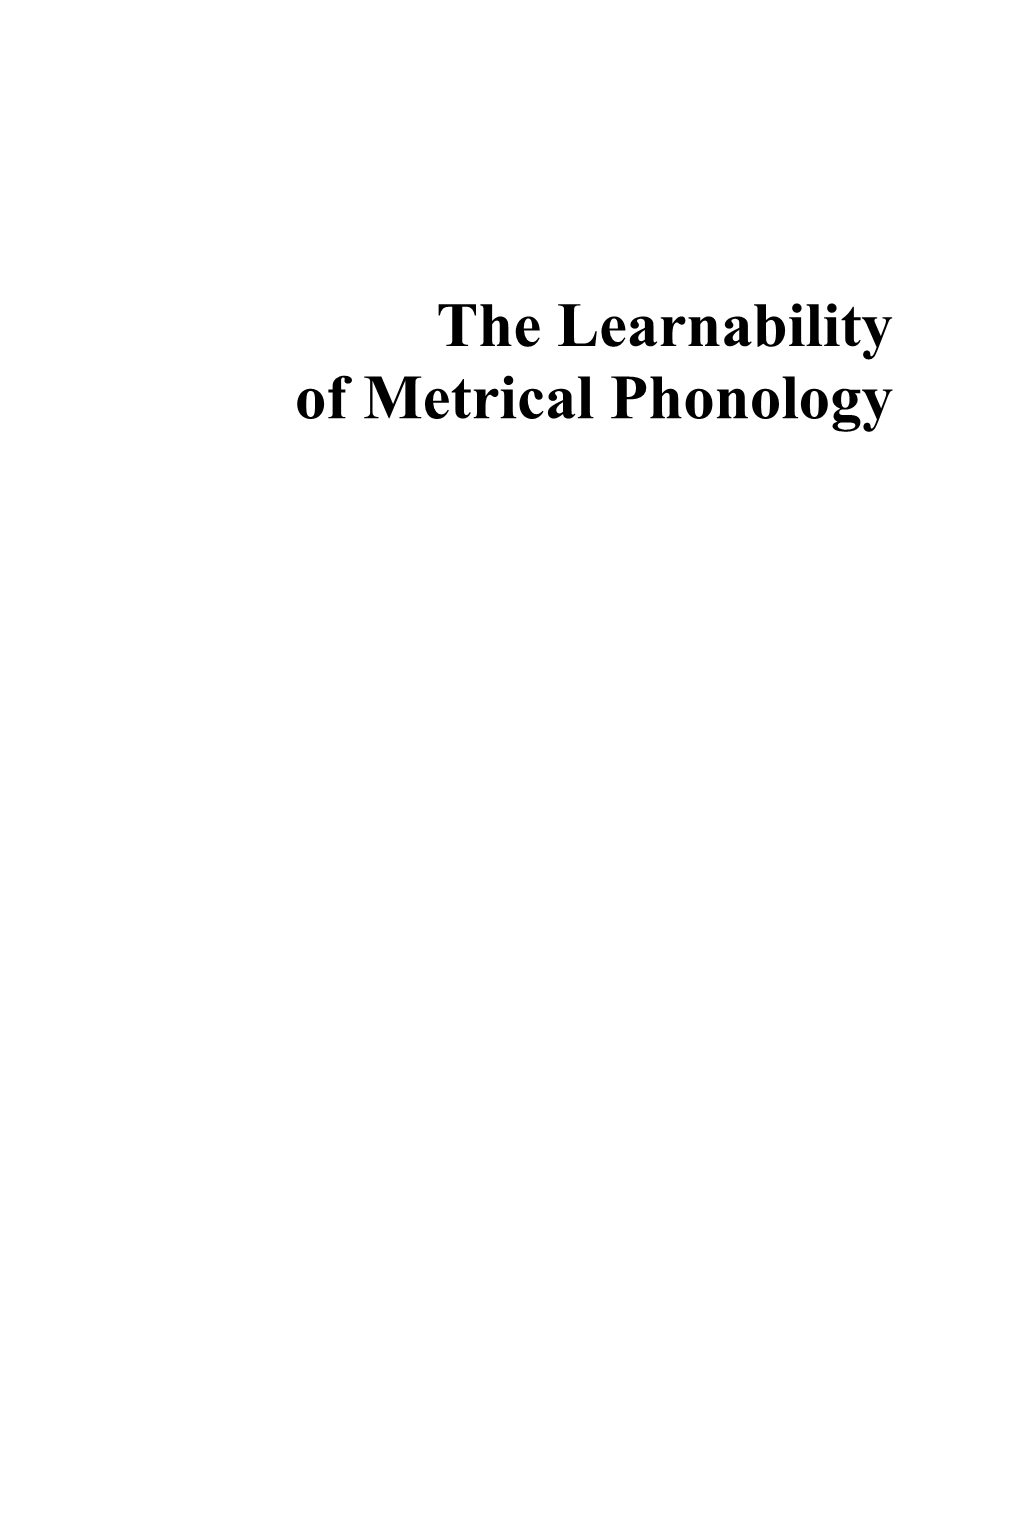 The Learnability of Metrical Phonology